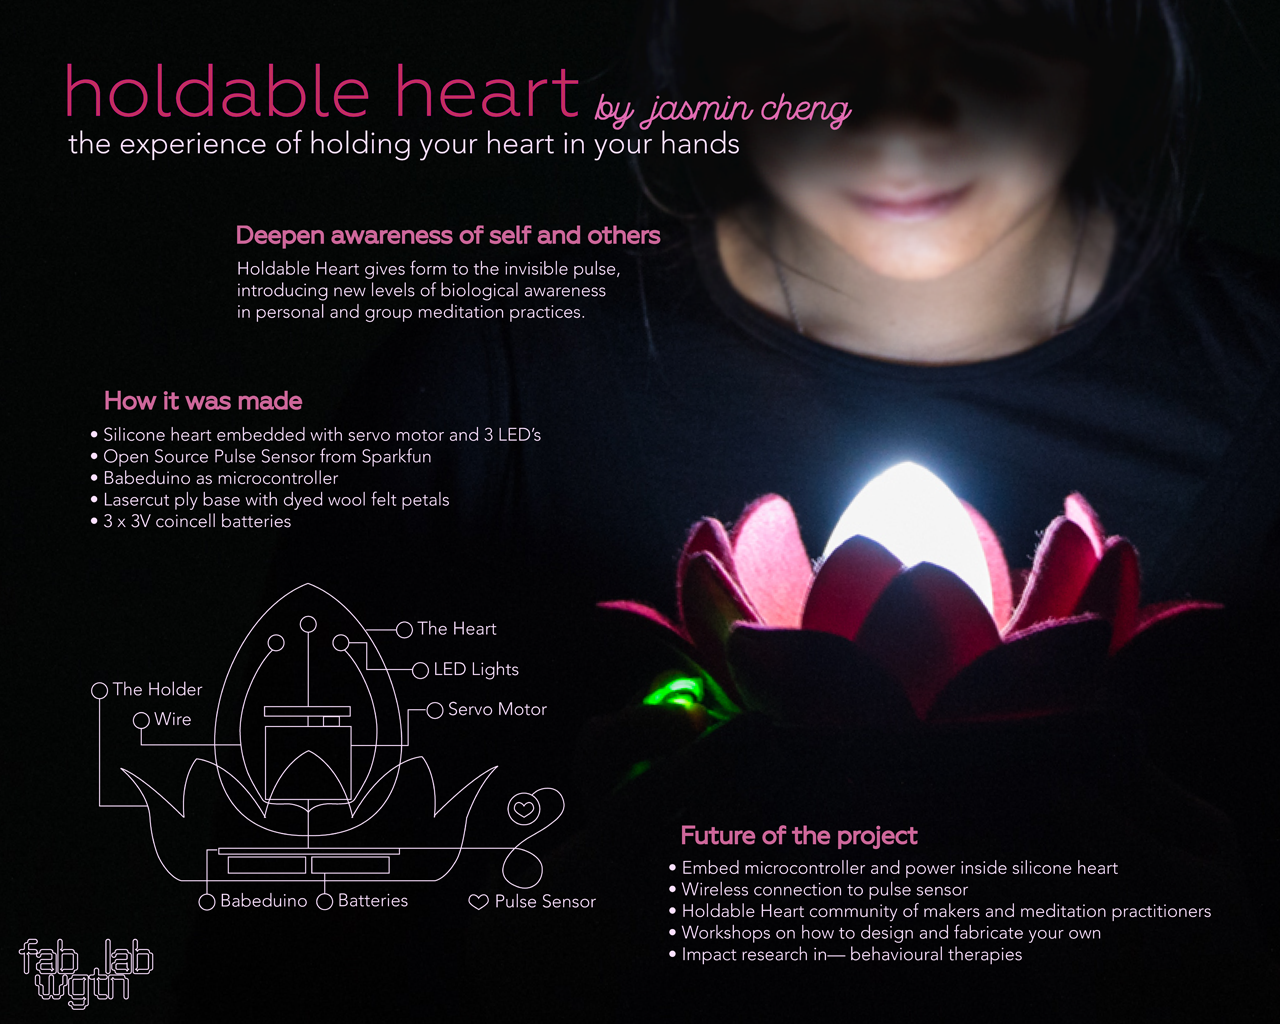 The Holdable Heart Project